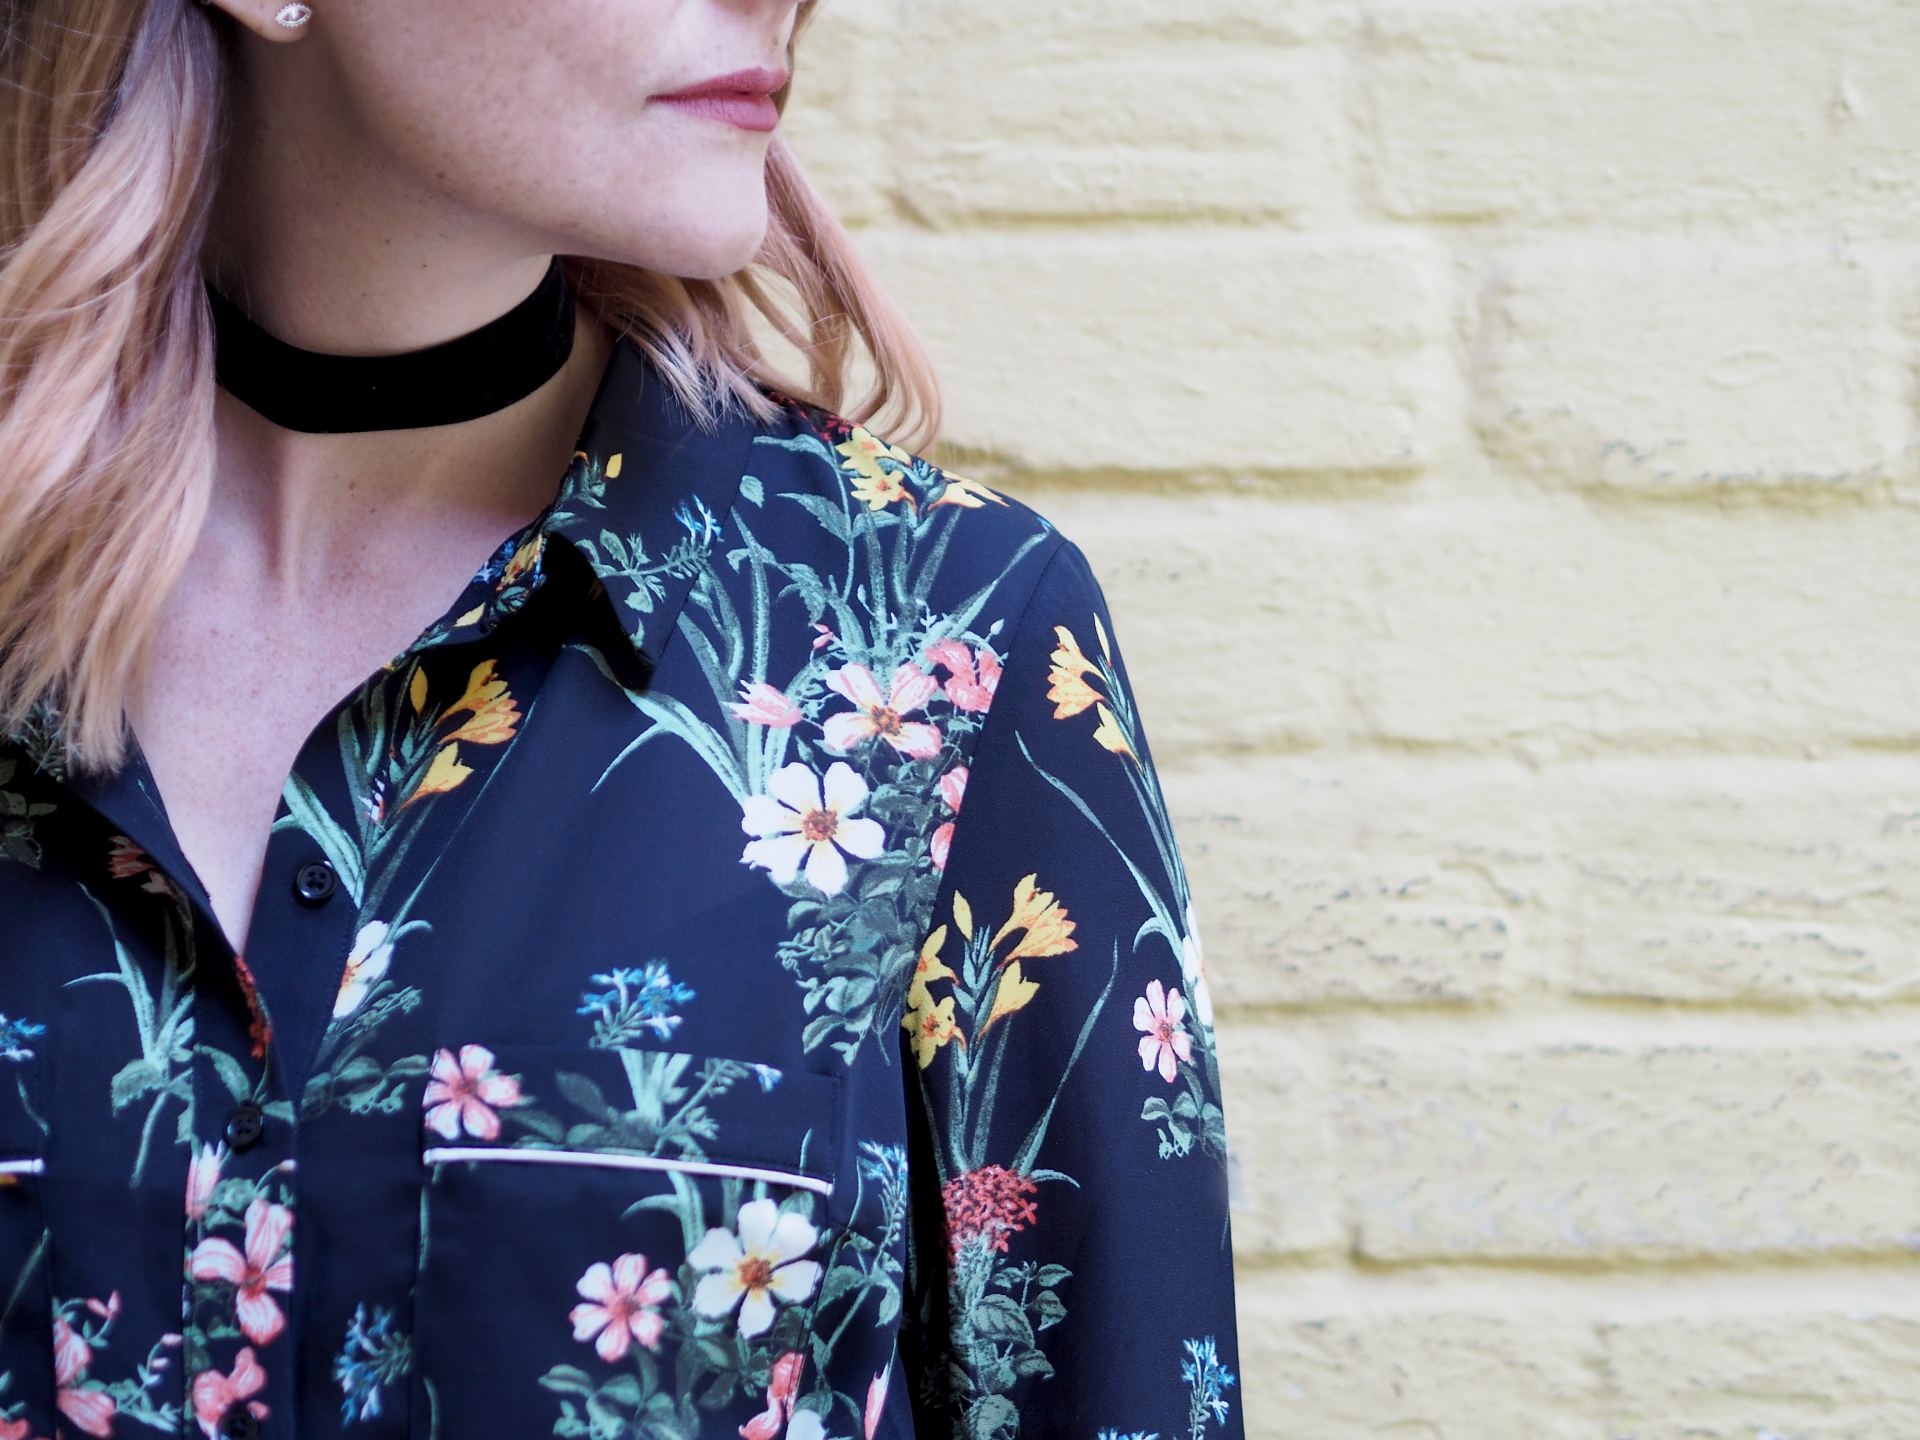 oasis floral shirt dress outfit